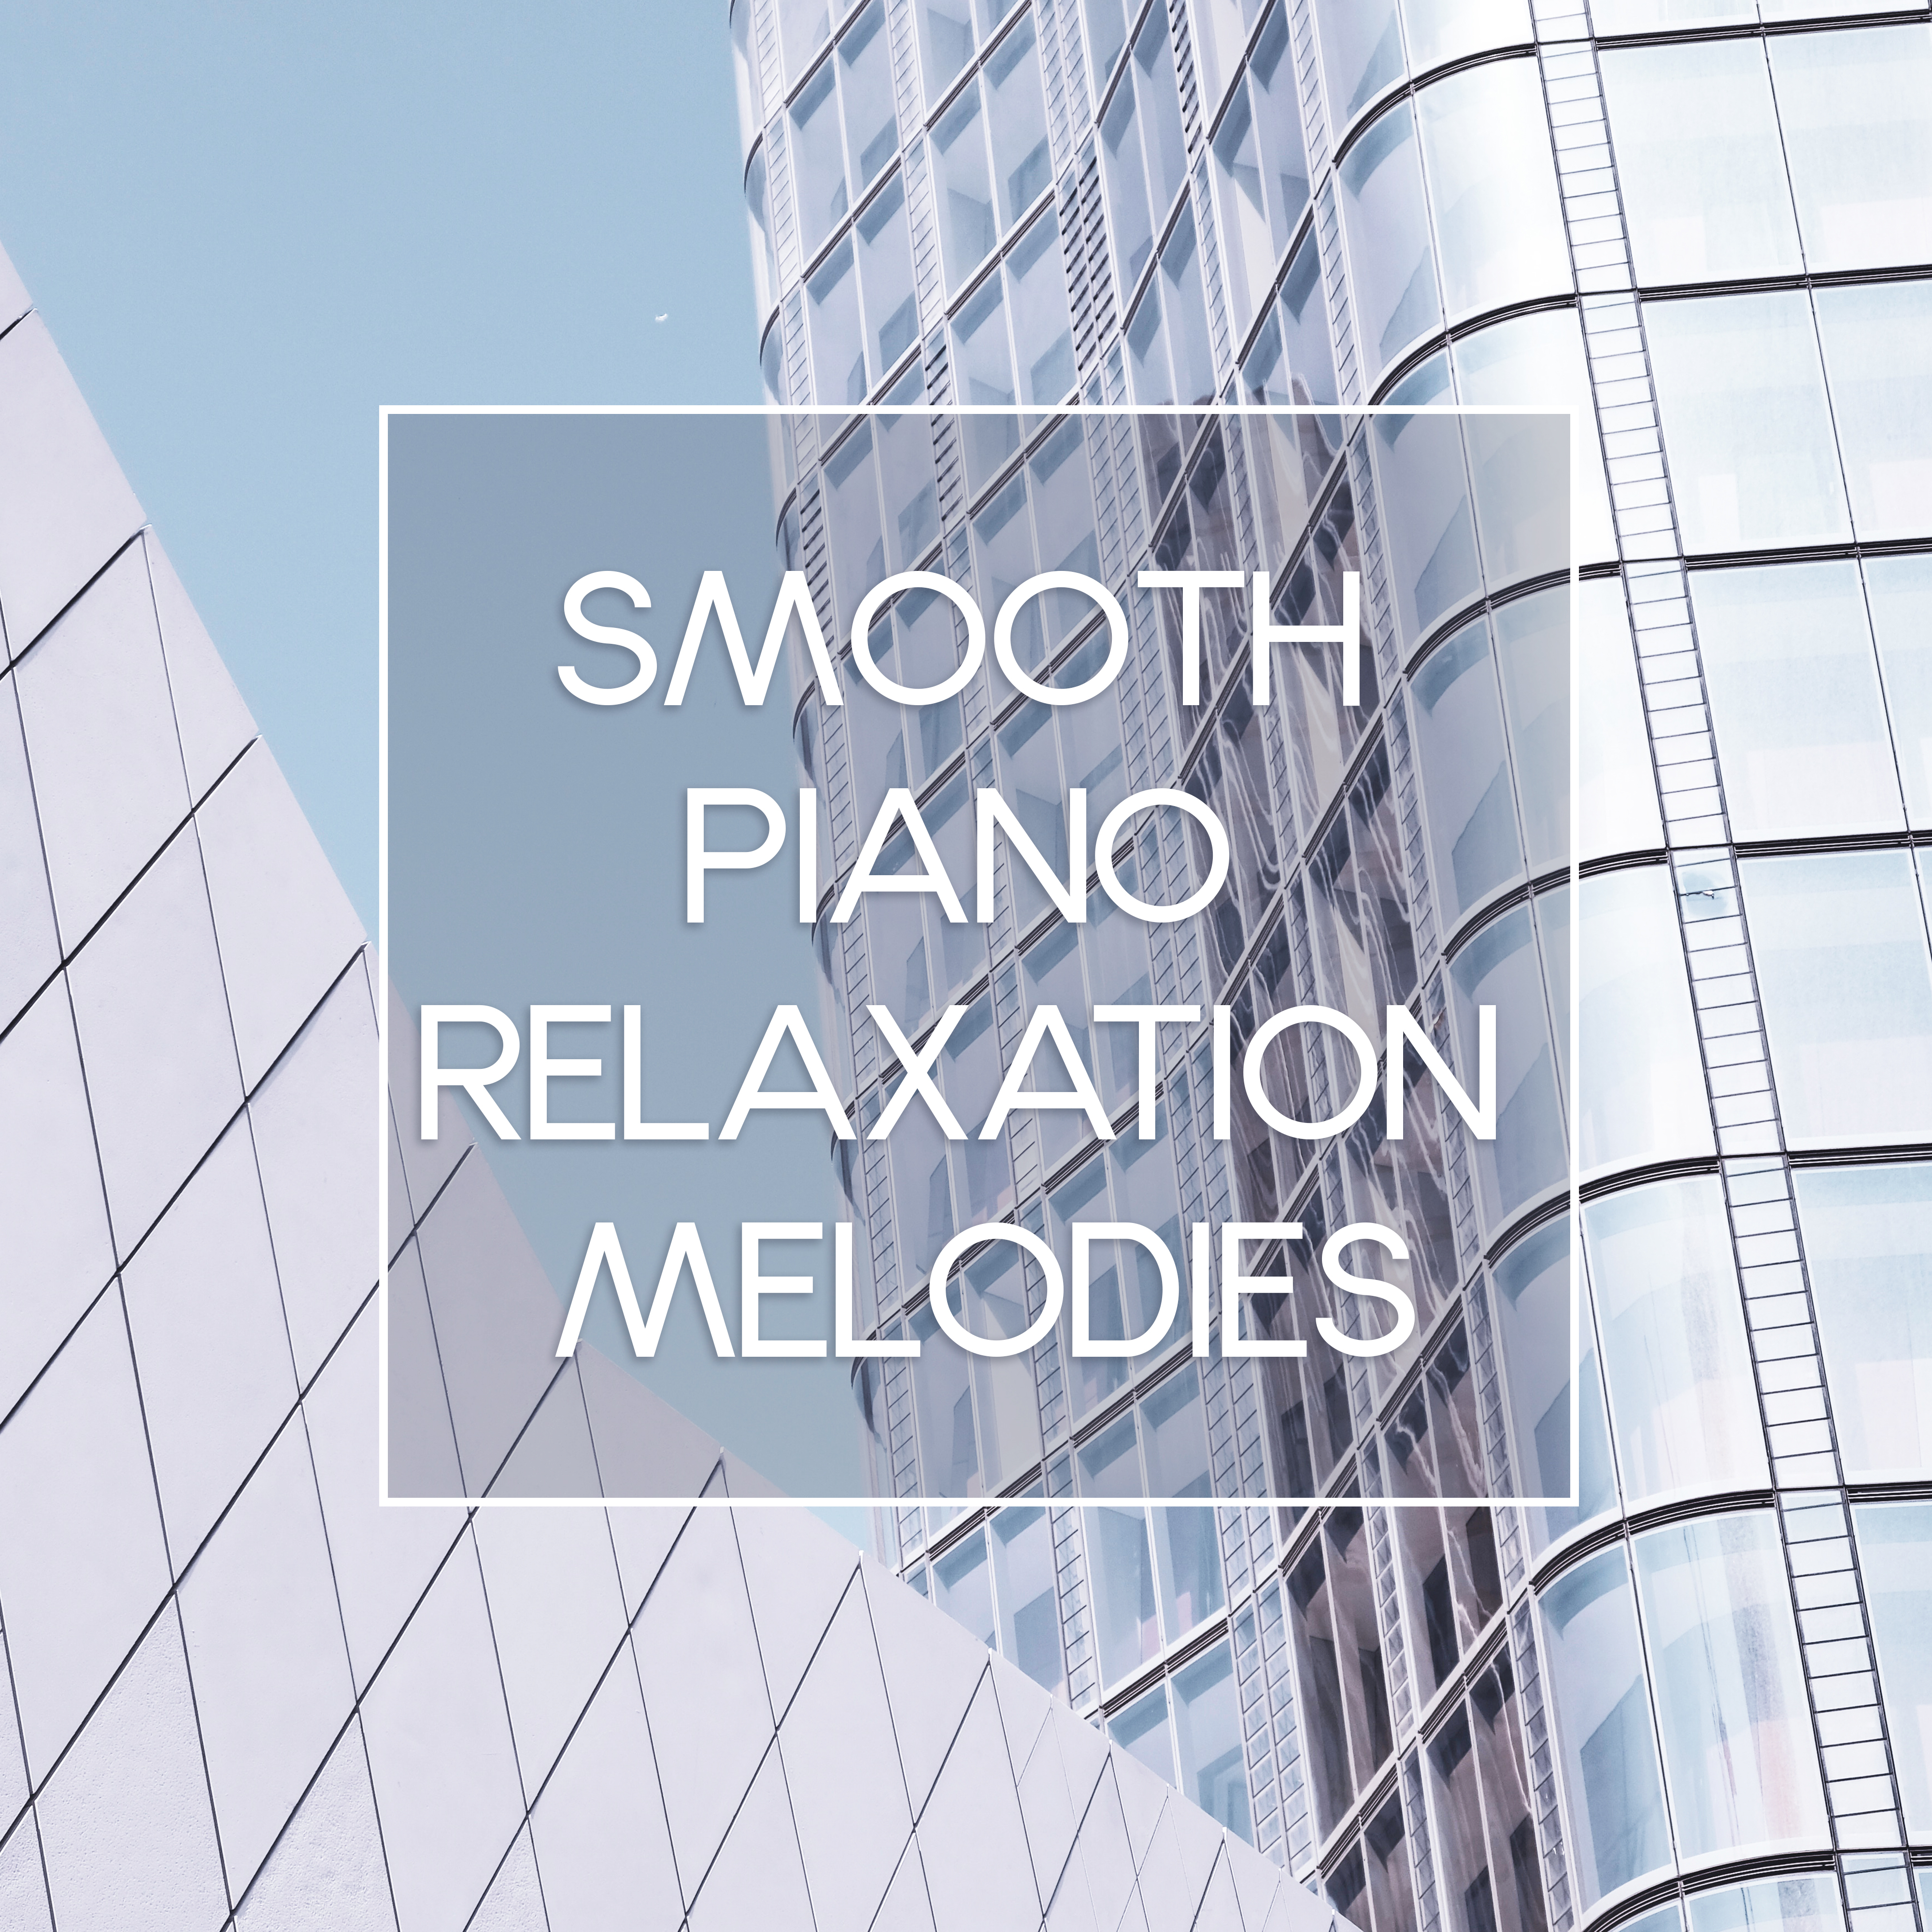 Smooth Piano Relaxation Melodies